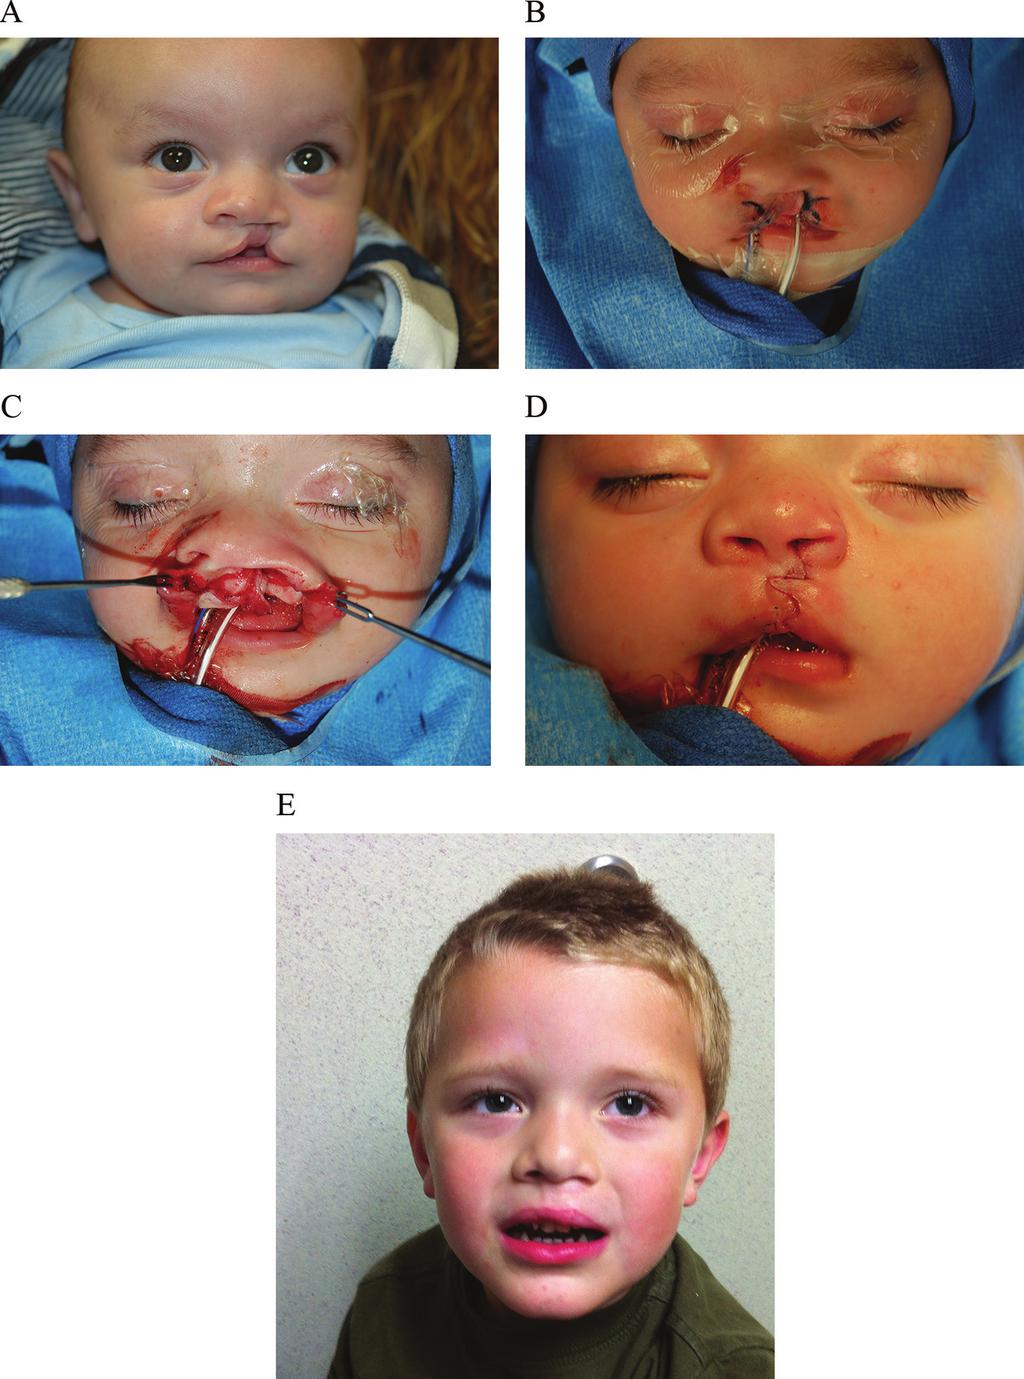 Surgical Techniques for Treatment of Unilateral Cleft Lip http://dx.doi.org/10.5772/67124 91 Figure 17. (A) An infant with a complete unilateral cleft lip.